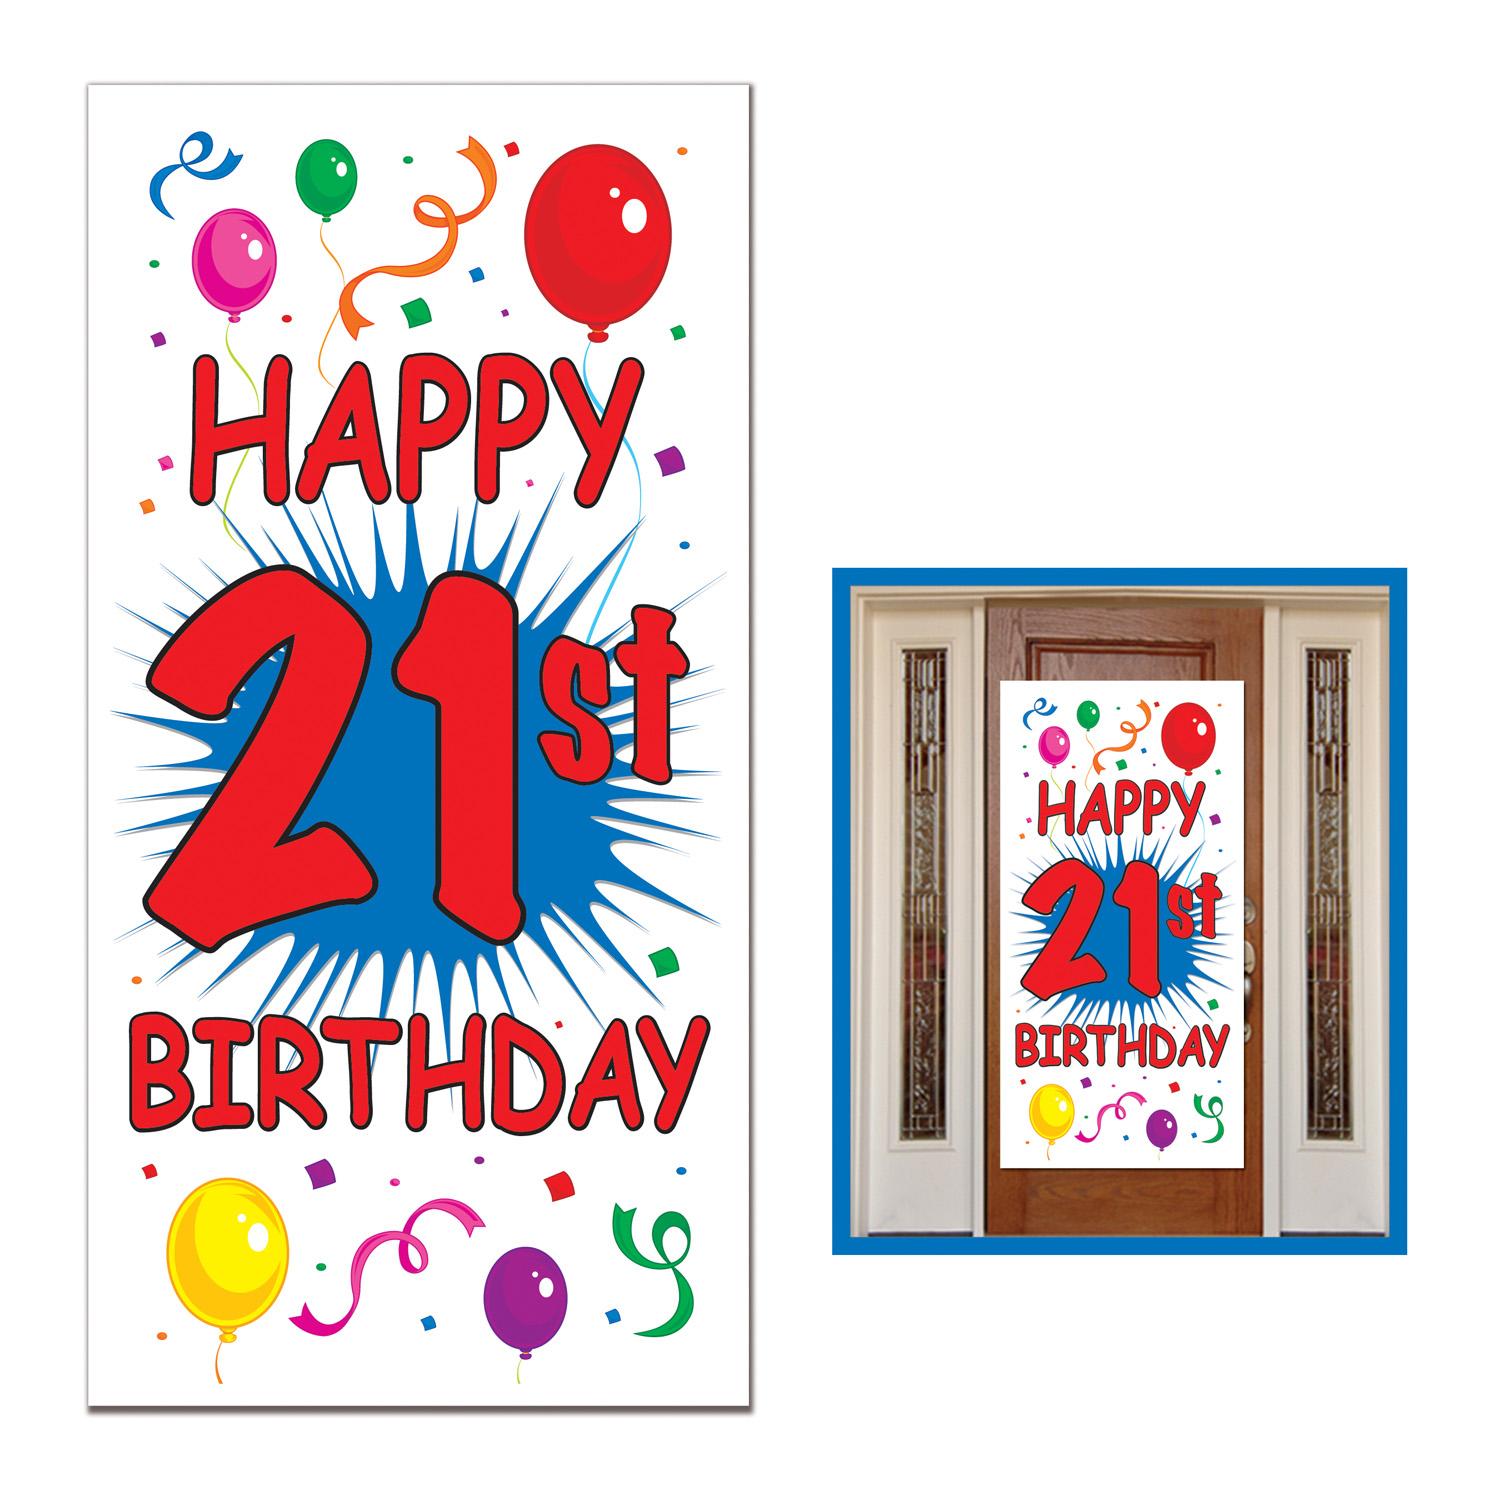 Beistle 21st Birthday Party Door Cover- Multicolor